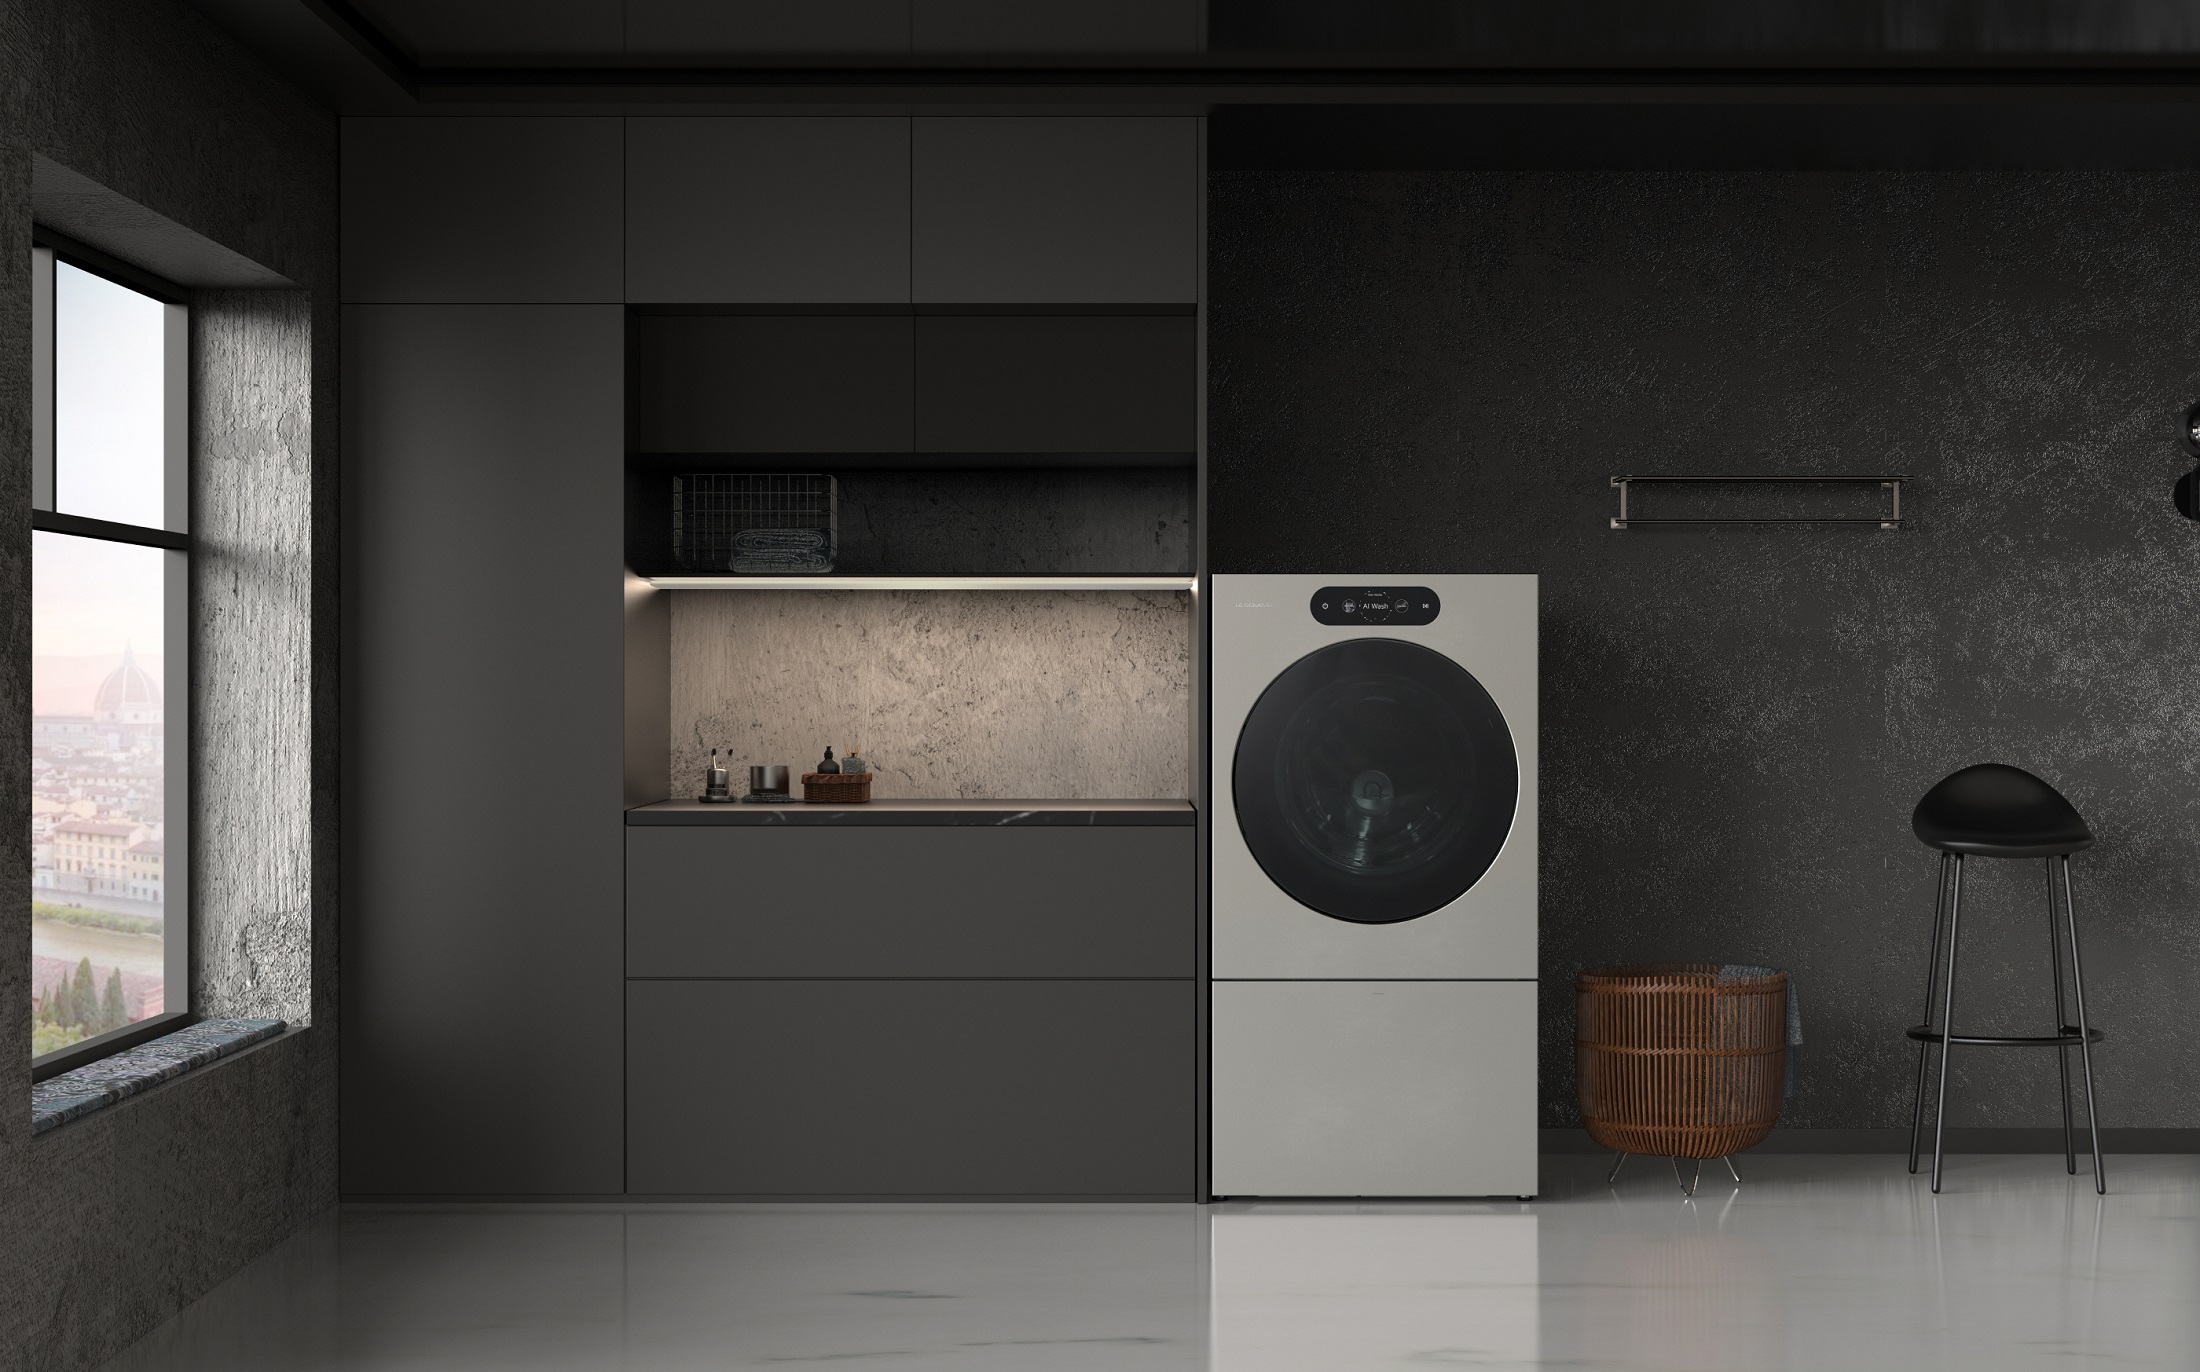 The new LG SIGNATURE Washer-Dryer with Heat Pump